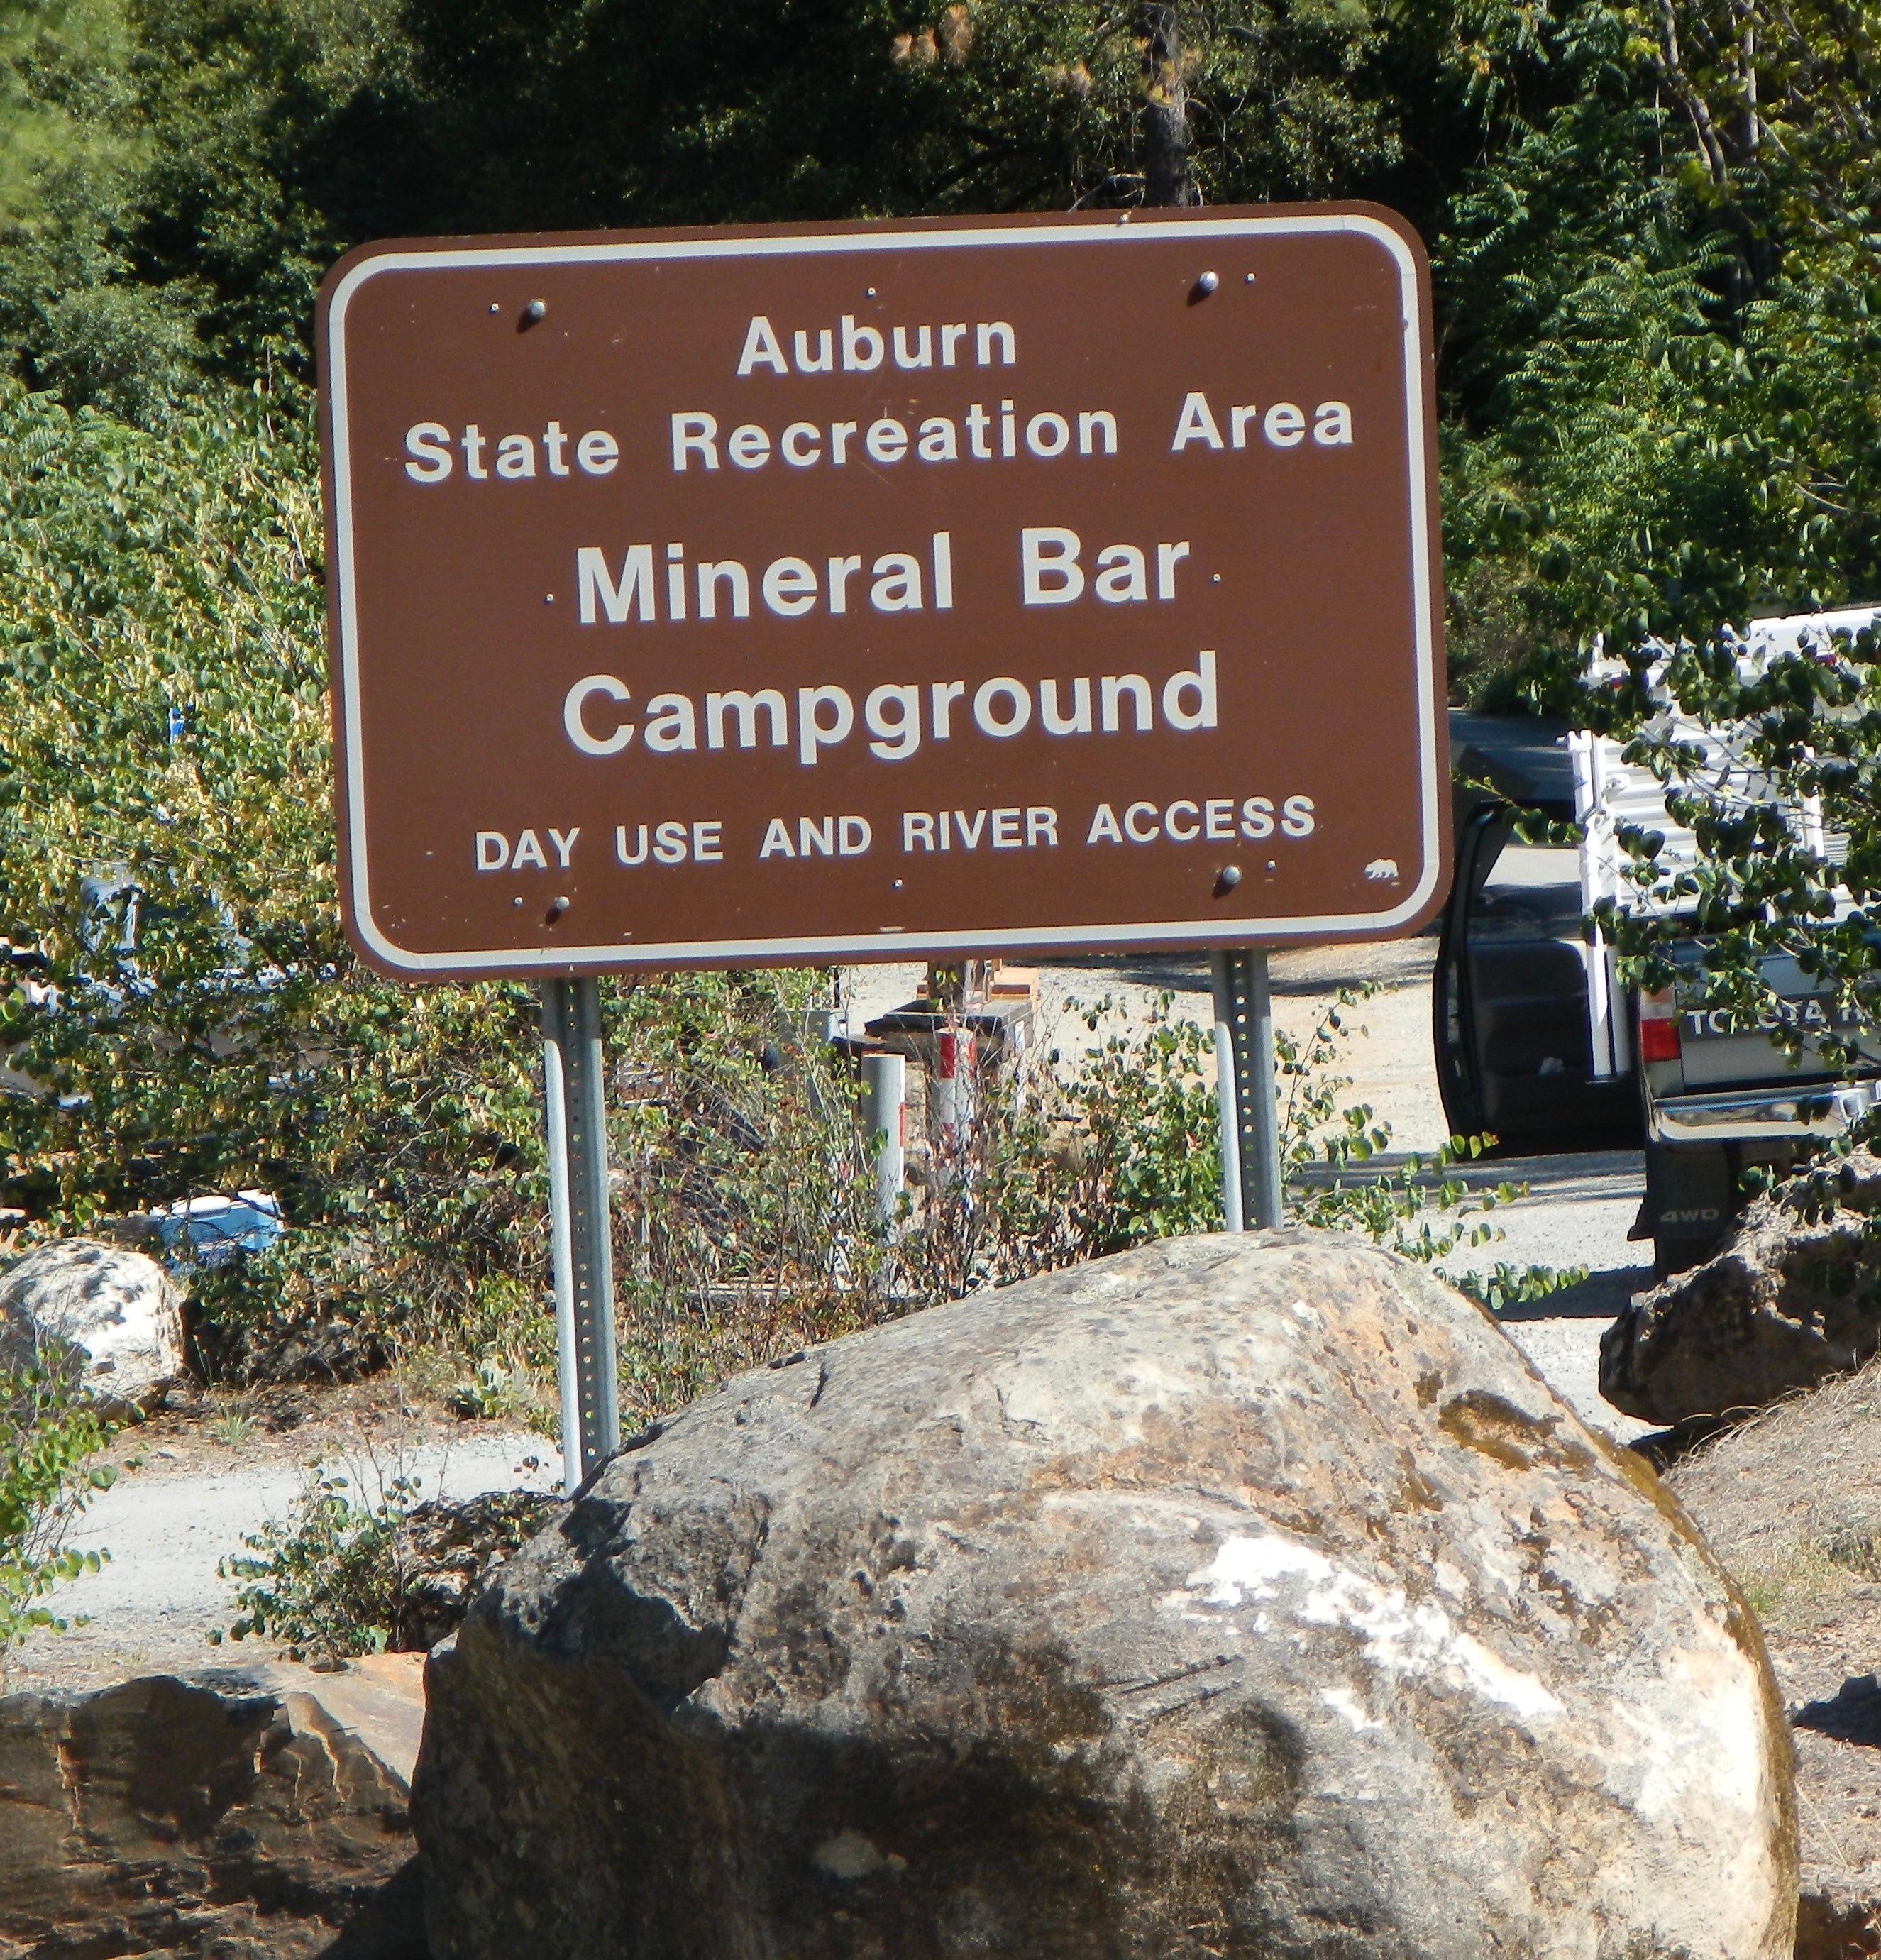 Camper submitted image from Mineral Bar Campground — Auburn State Recreation Area - 5